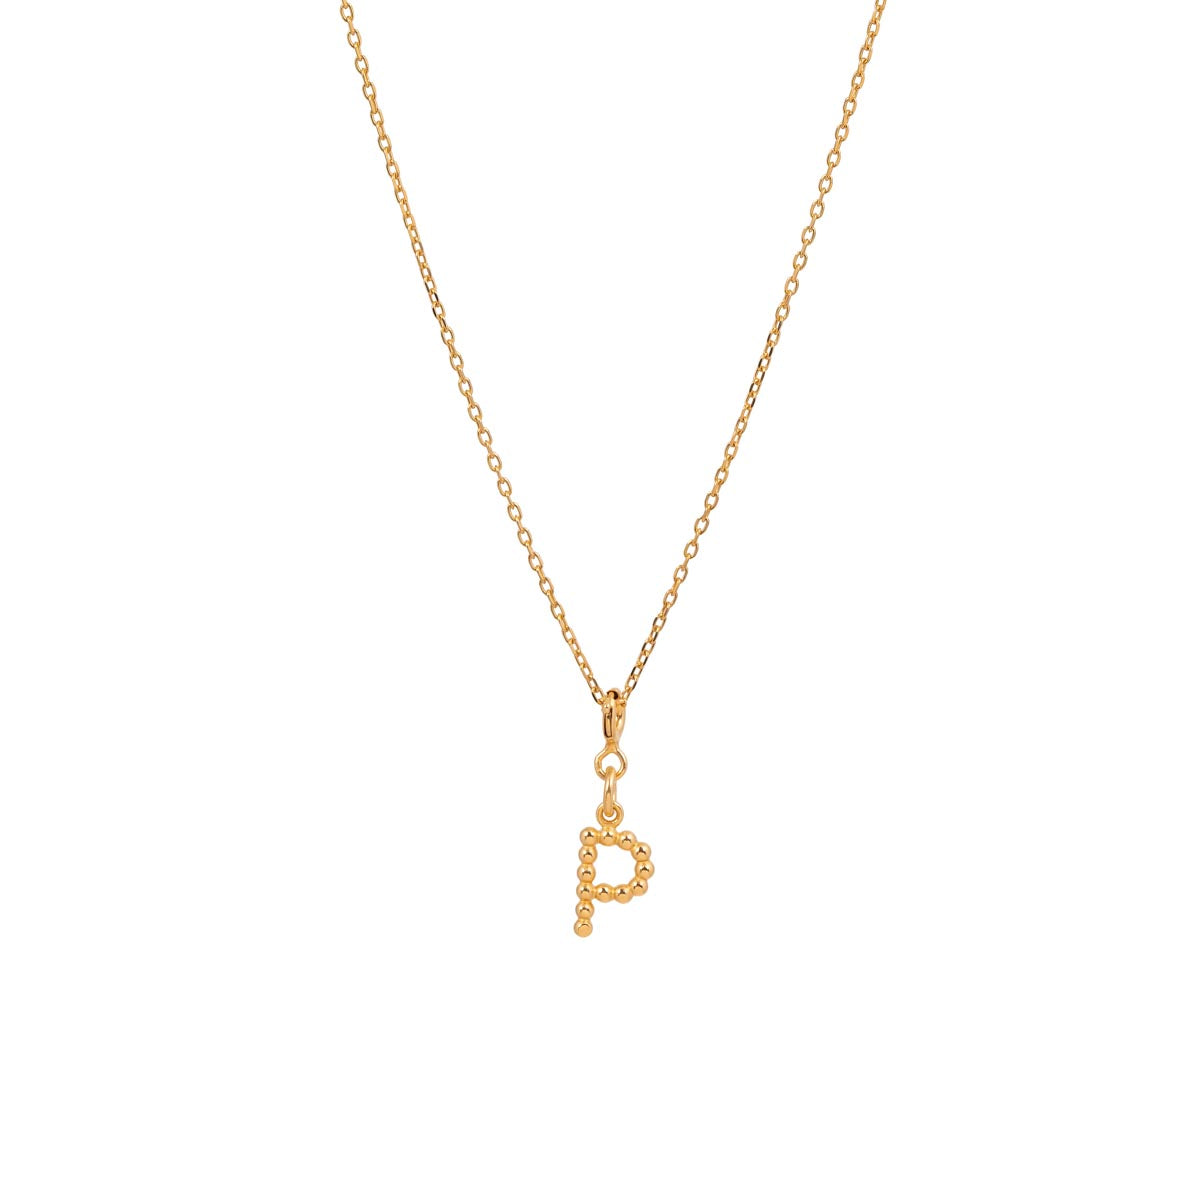 Yllätys Monogram Necklace P, gold-plated silver